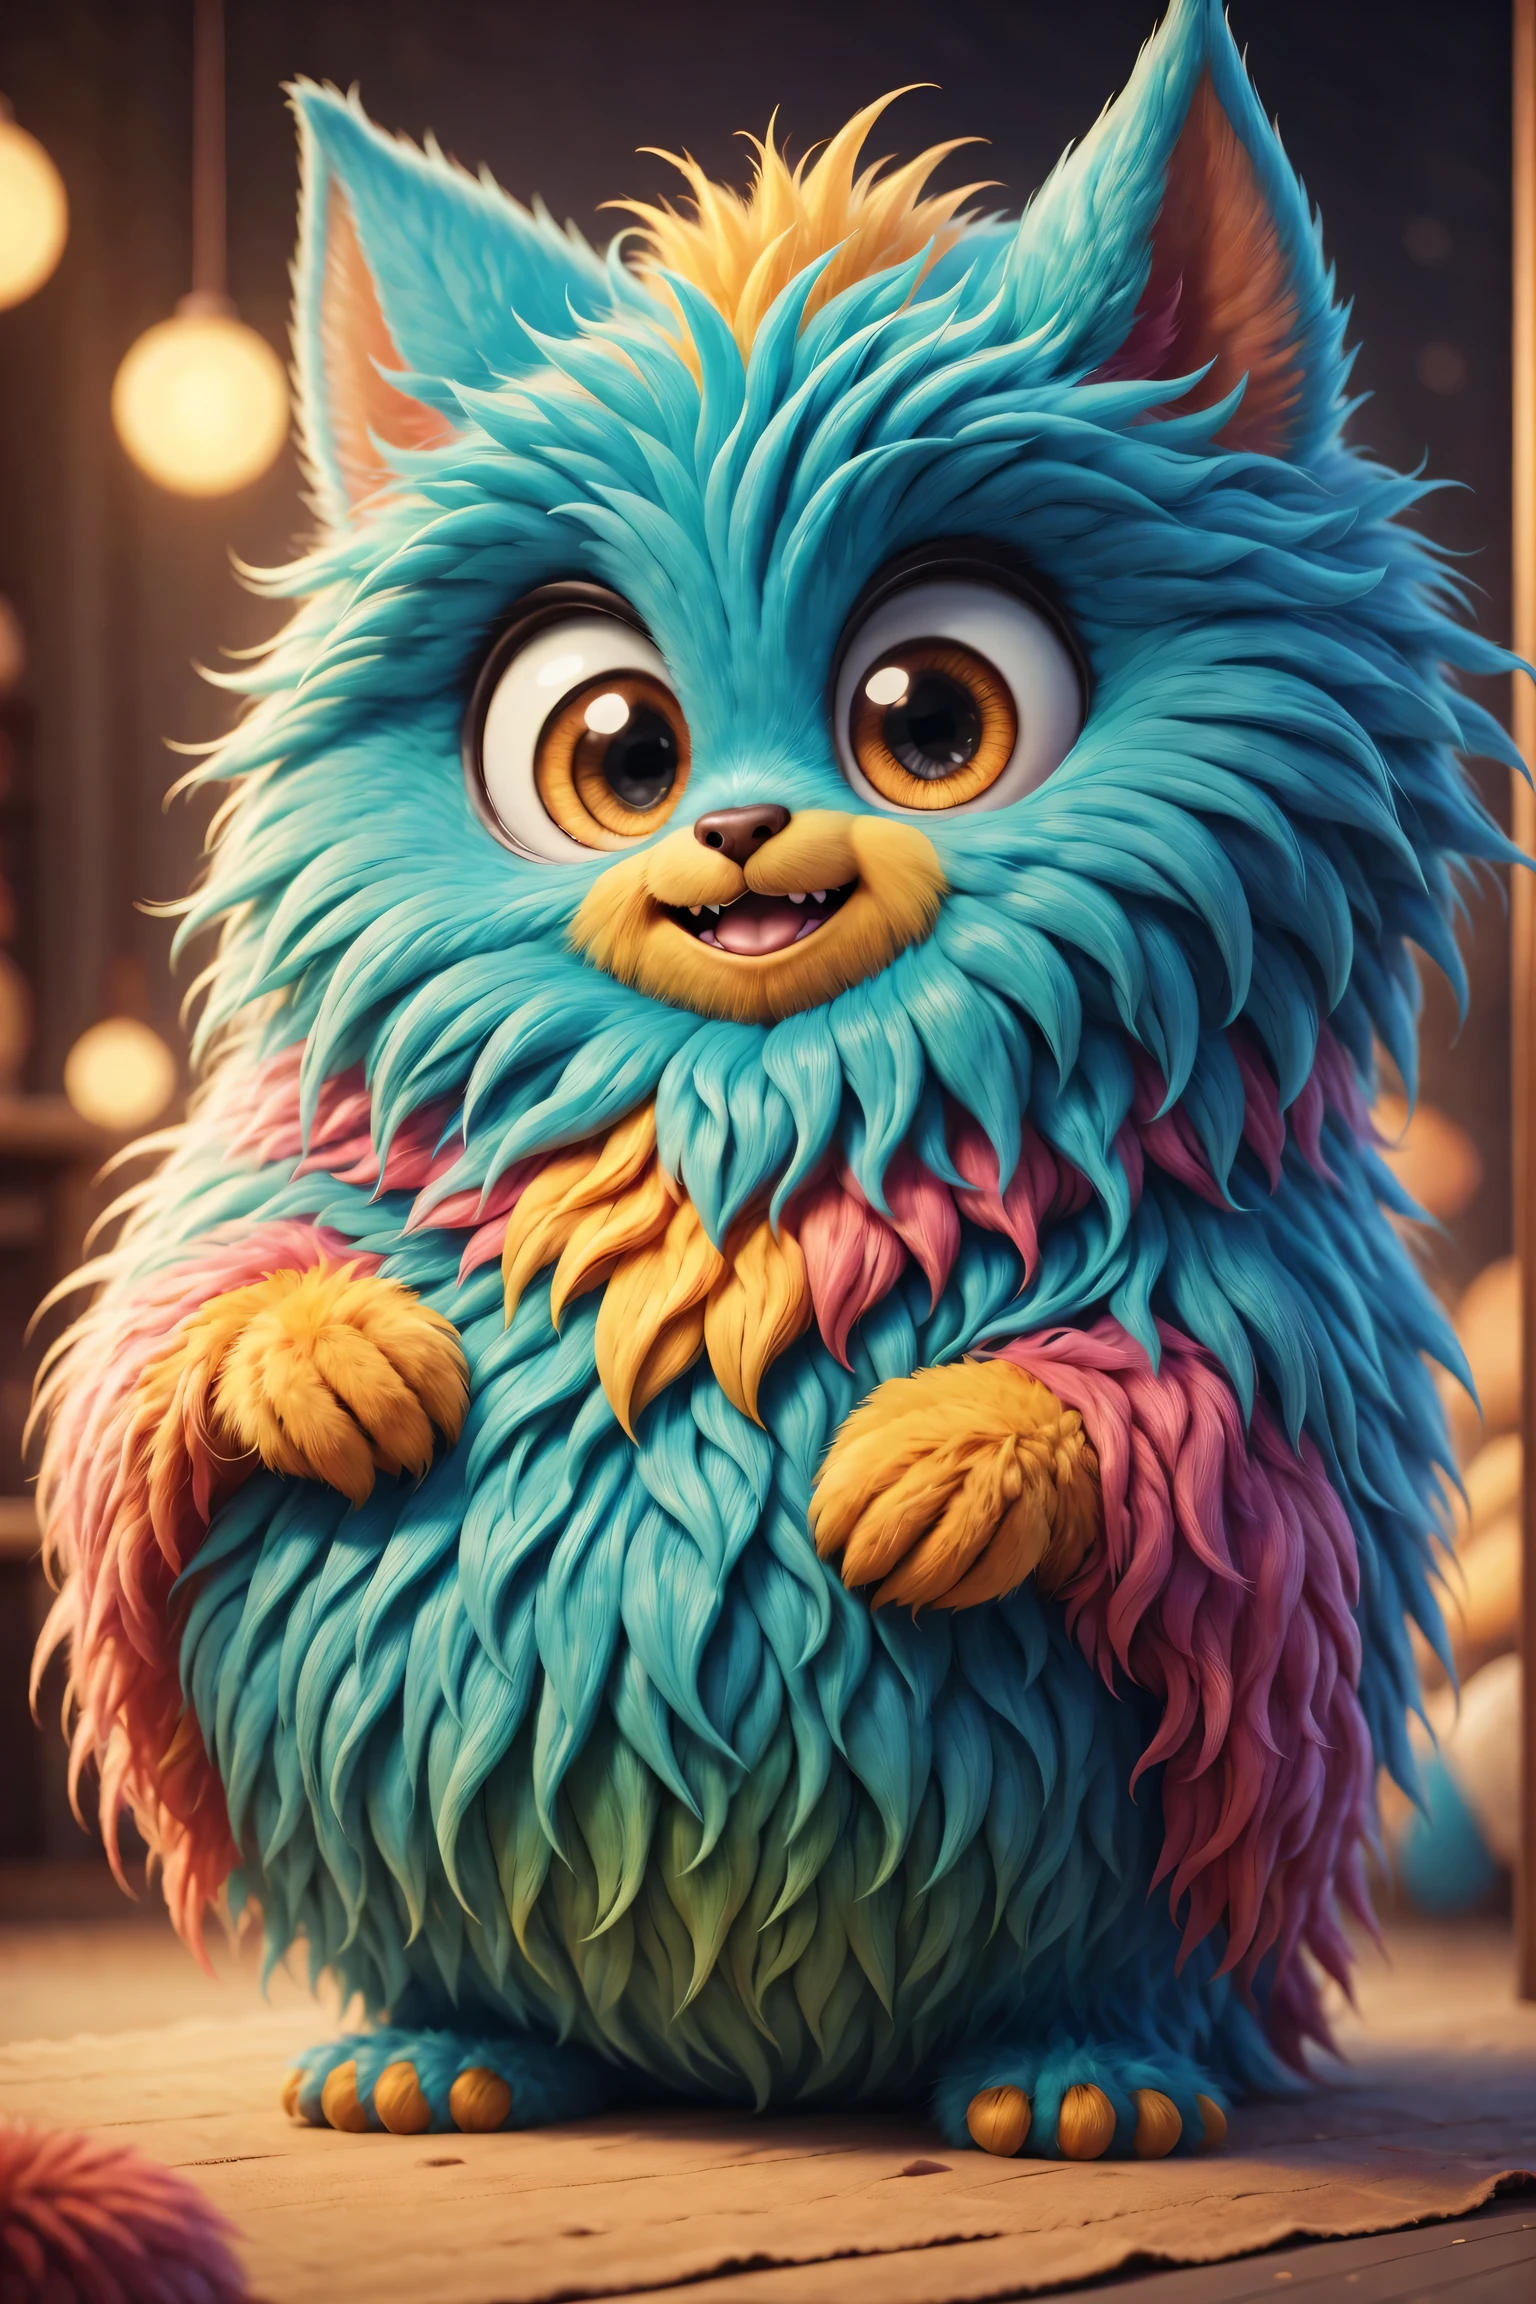 （best quality），Super fine，lifelike，3d rendering，Cute furry monster，cute eyes，cartoonish style，colorful fur，mischievous expression，Soft texture，Fantasy creatures，Bright and vibrant colors，warm light，